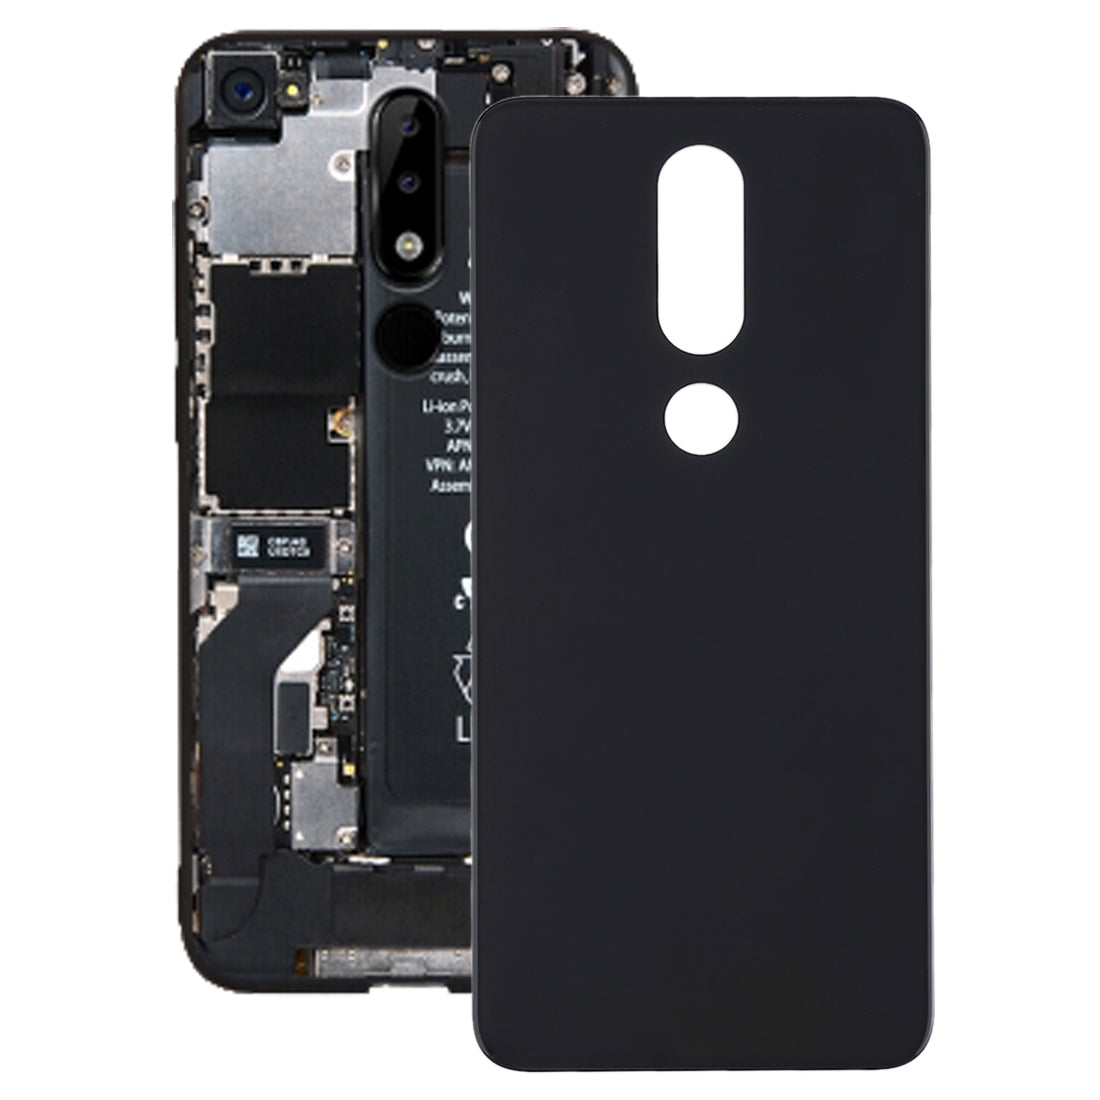 Battery Cover Back Cover Nokia 5.1 Plus X5 Black